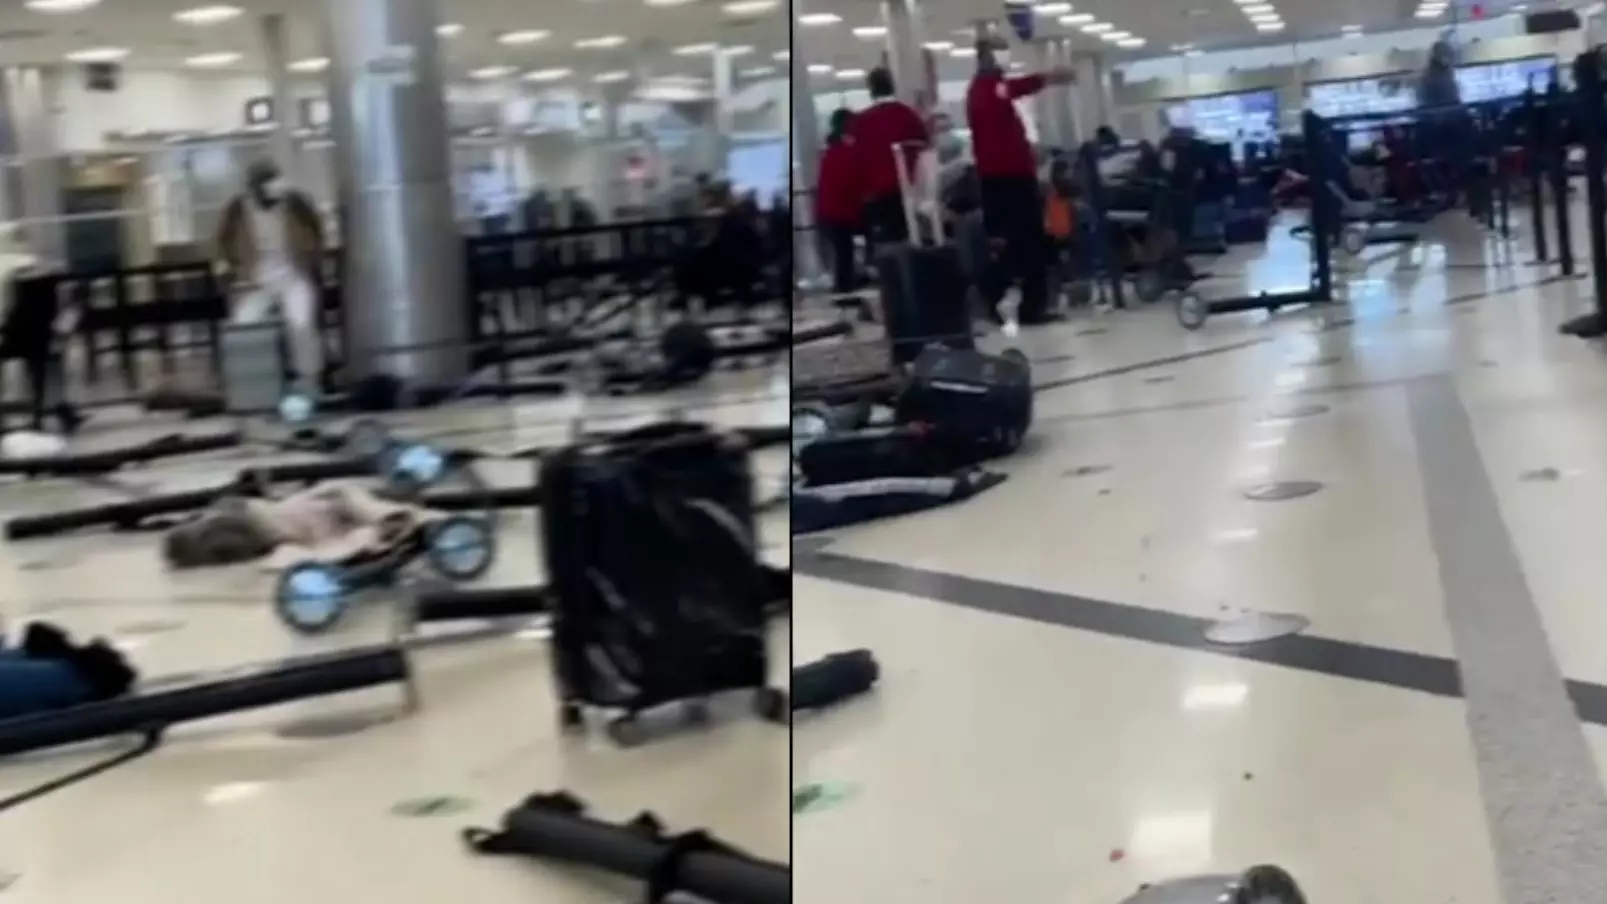 Airport Descends Into Chaos After Gun Discharged At Security